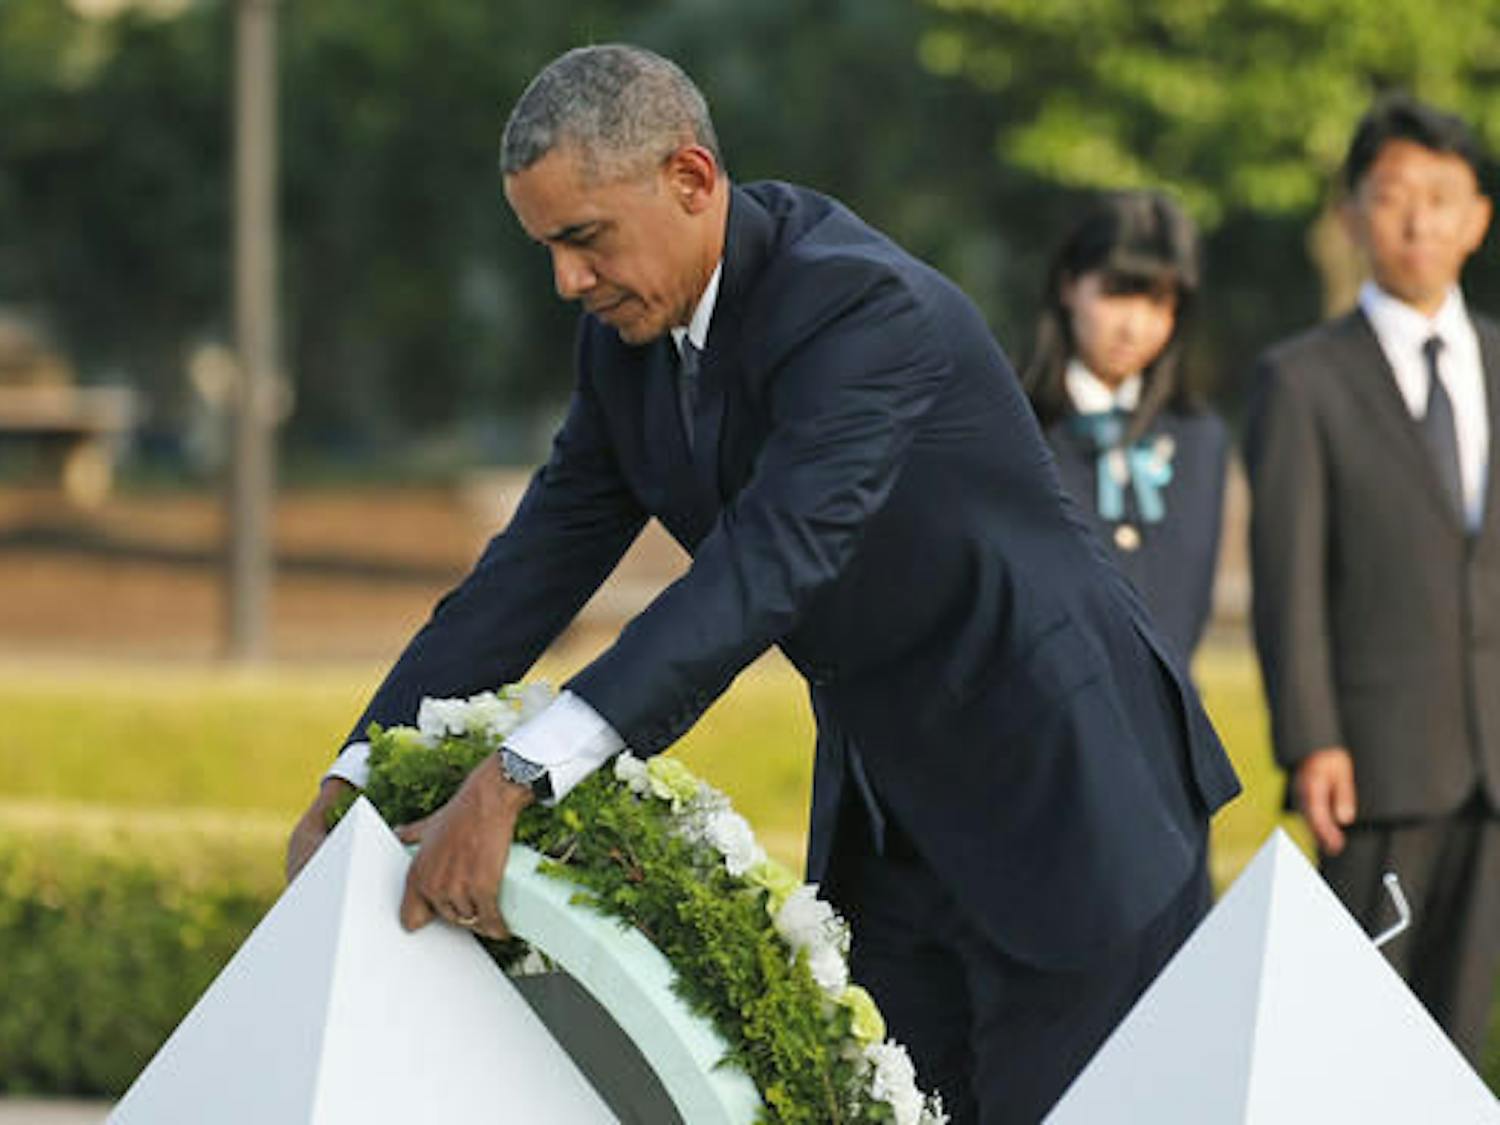 U.S. President Barack Obama lays wreaths at the cenotaph at Hiroshima Peace Memorial Park in Hiroshima, western Japan, Friday, May 27, 2016. Obama on Friday became the first sitting U.S. president to visit the site of the world's first atomic bomb attack, bringing global attention both to survivors and to his unfulfilled vision of a world without nuclear weapons. (AP Photo/Shuji Kajiyama)